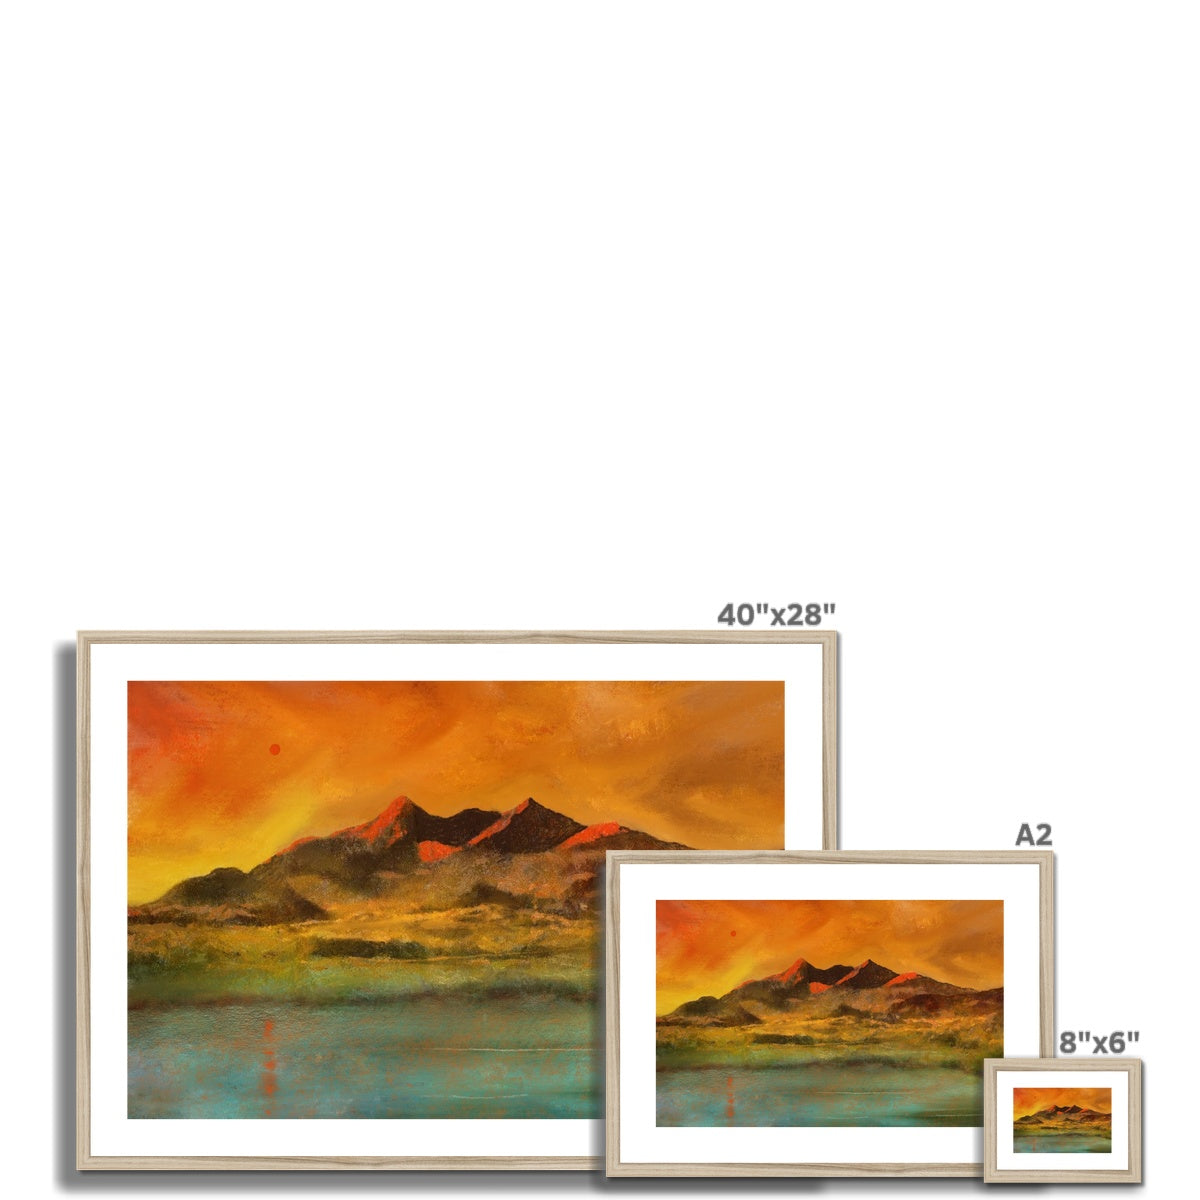 Skye Red Moon Cuillin Painting | Framed & Mounted Prints From Scotland-Framed & Mounted Prints-Skye Art Gallery-Paintings, Prints, Homeware, Art Gifts From Scotland By Scottish Artist Kevin Hunter